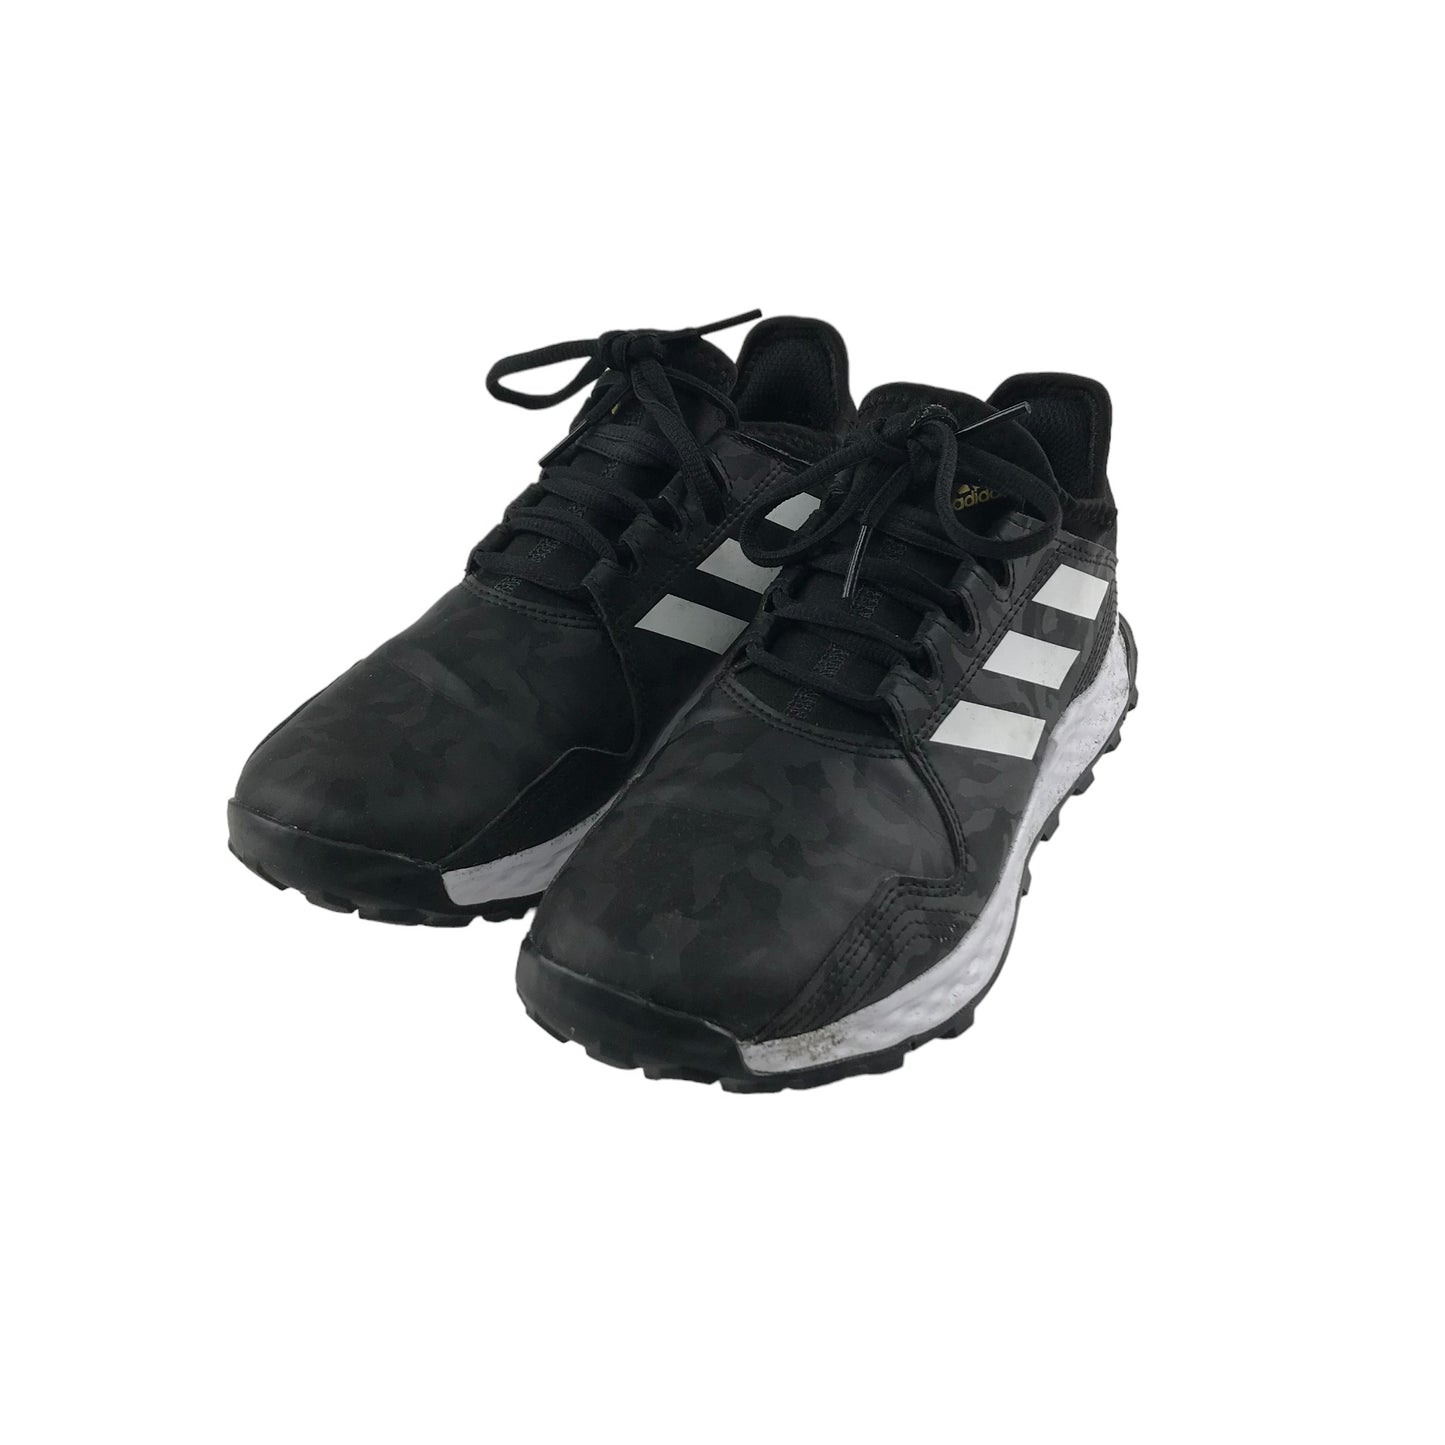 Adidas Trainers Shoe Size 5 Black Camo Pattern with Laces